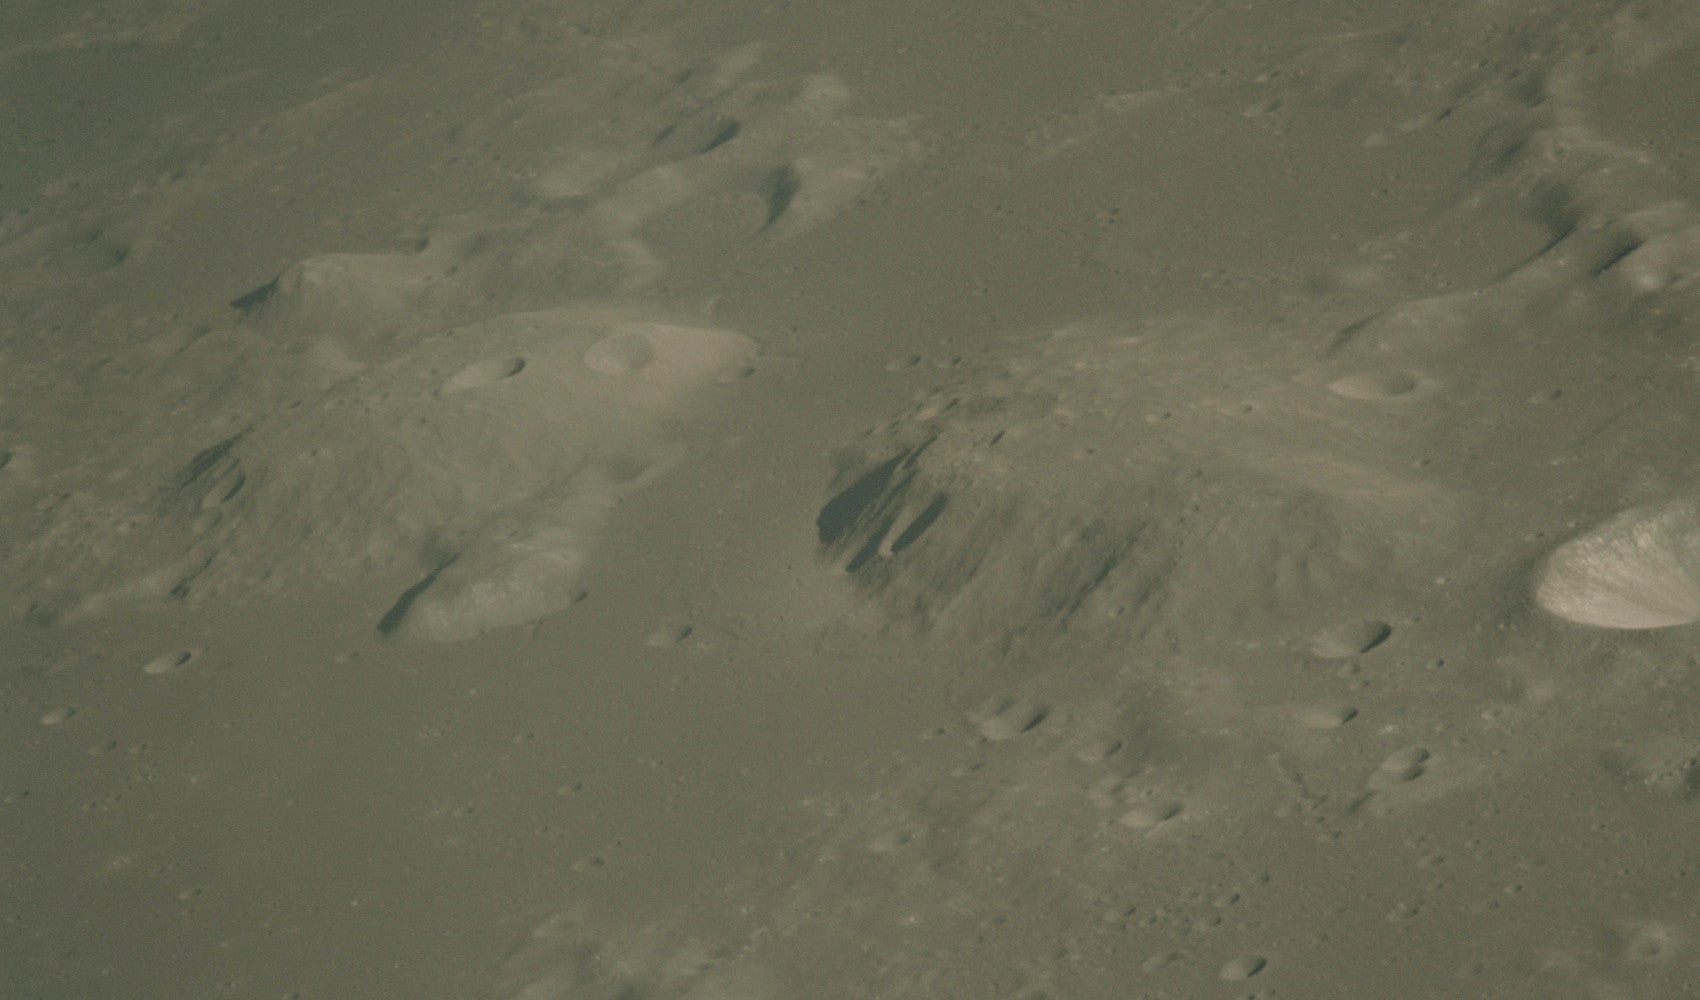 A side view of the Gruithuisen Domes, as photographed during the Apollo 15 mission.  (Photo: NASA)